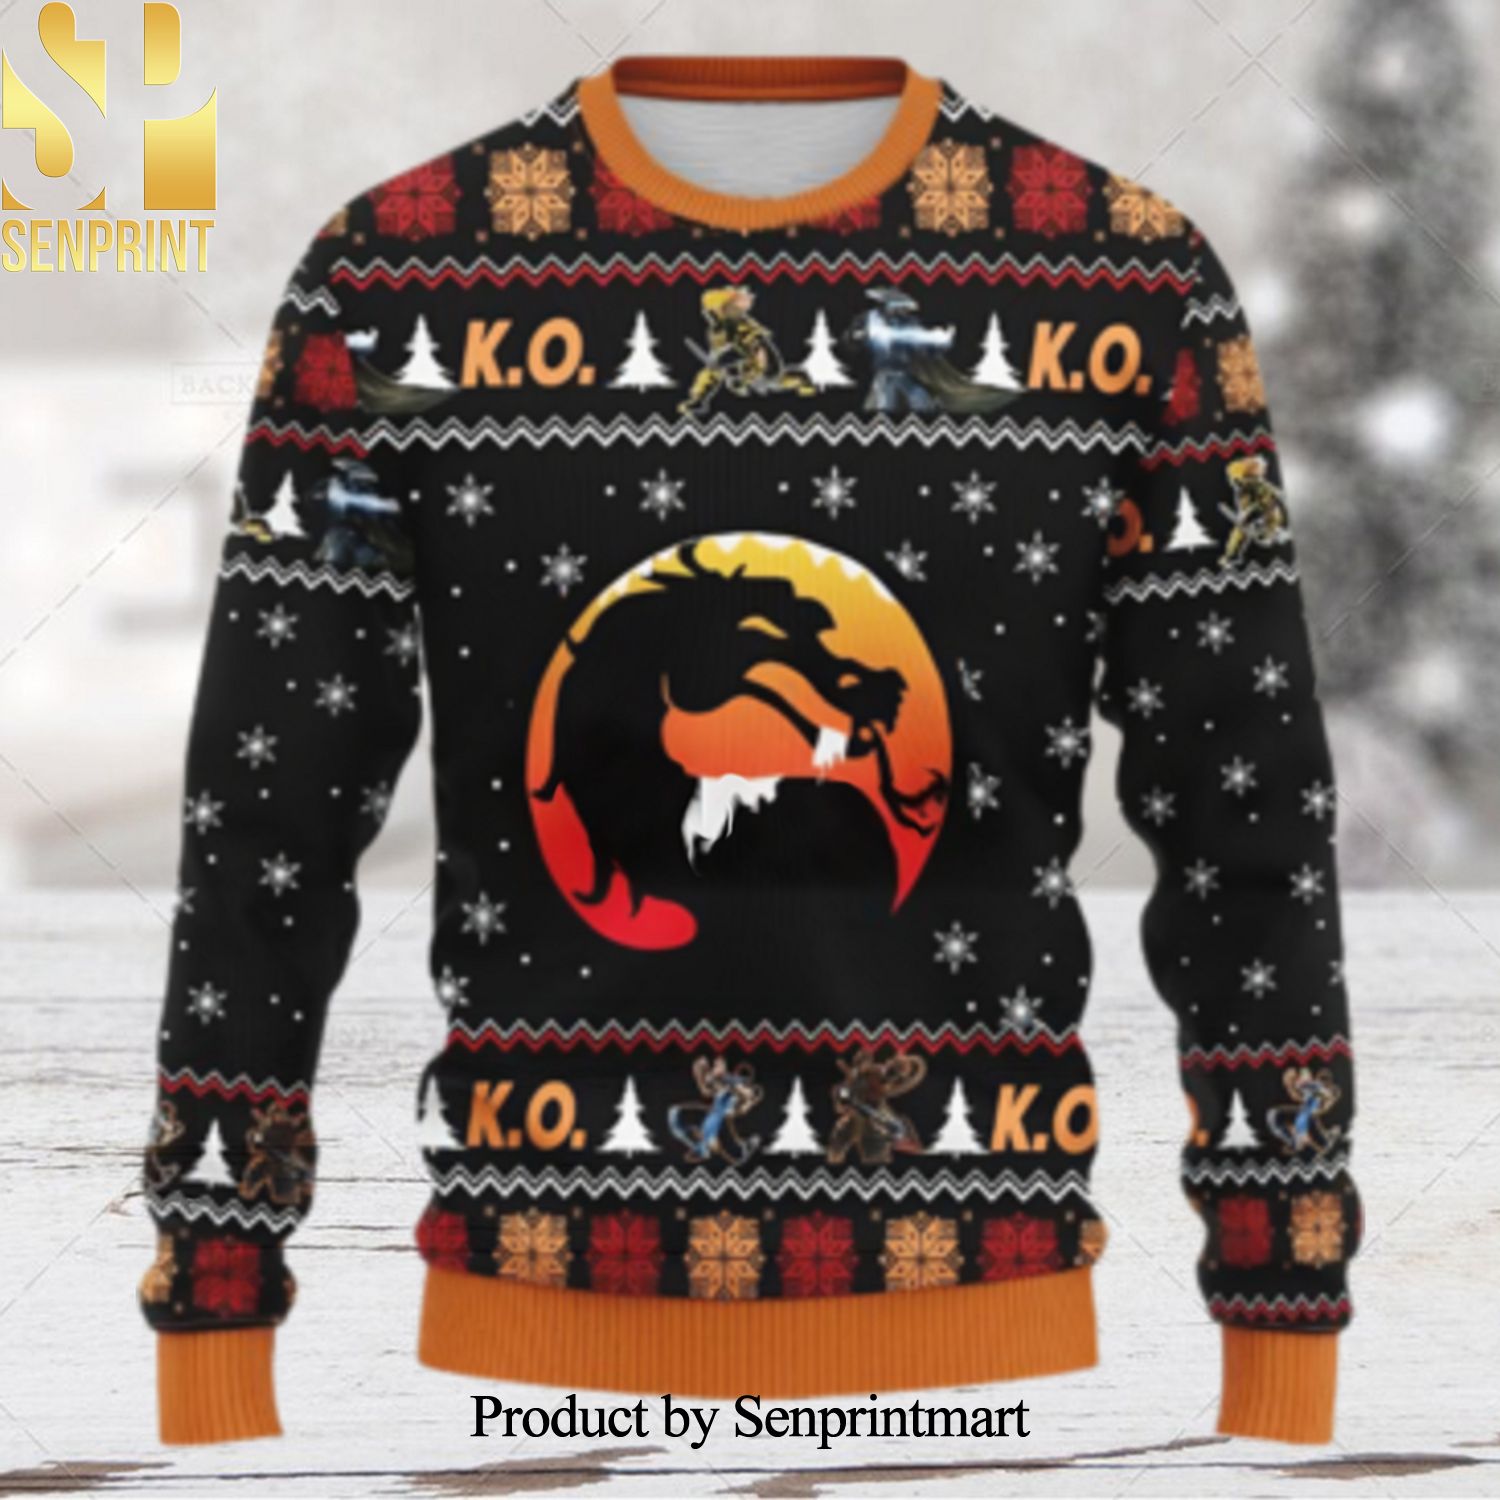 Mortal Kombat Xmas Wool Knitted Sweater 3D Printed Ugly Christmas Sweater